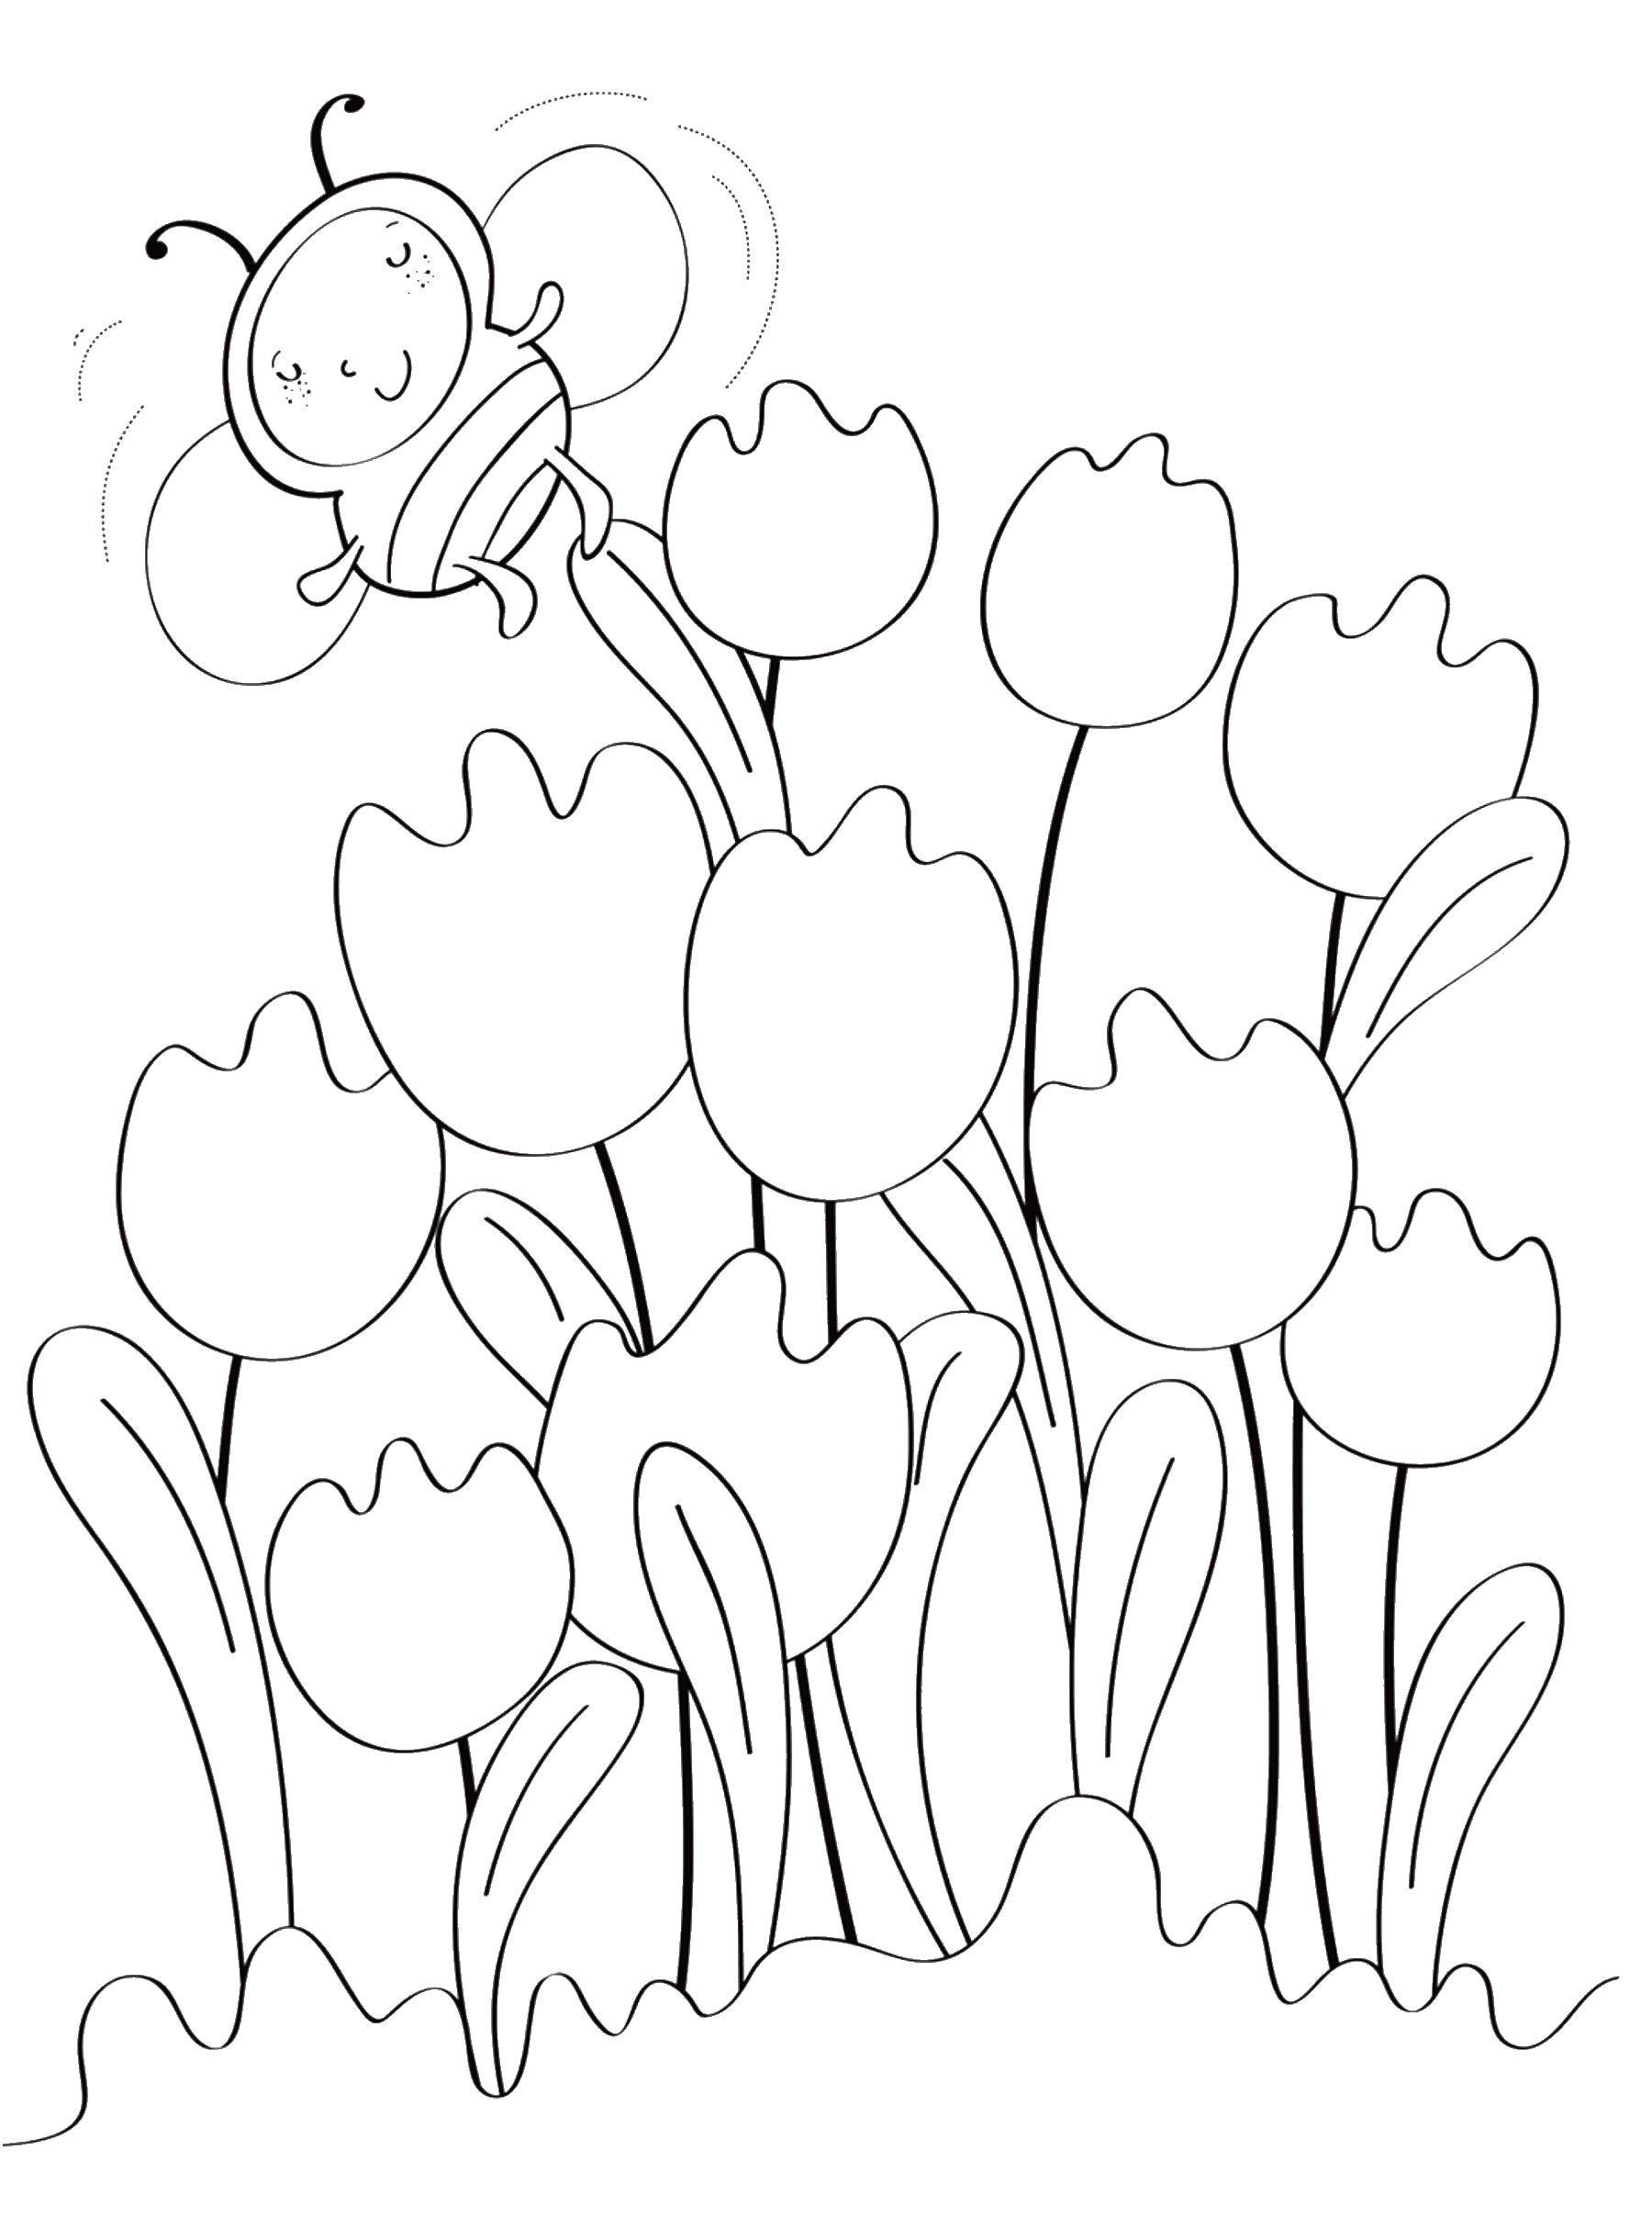 Coloring Bee of tulips. Category flowers. Tags:  flowers, bee.